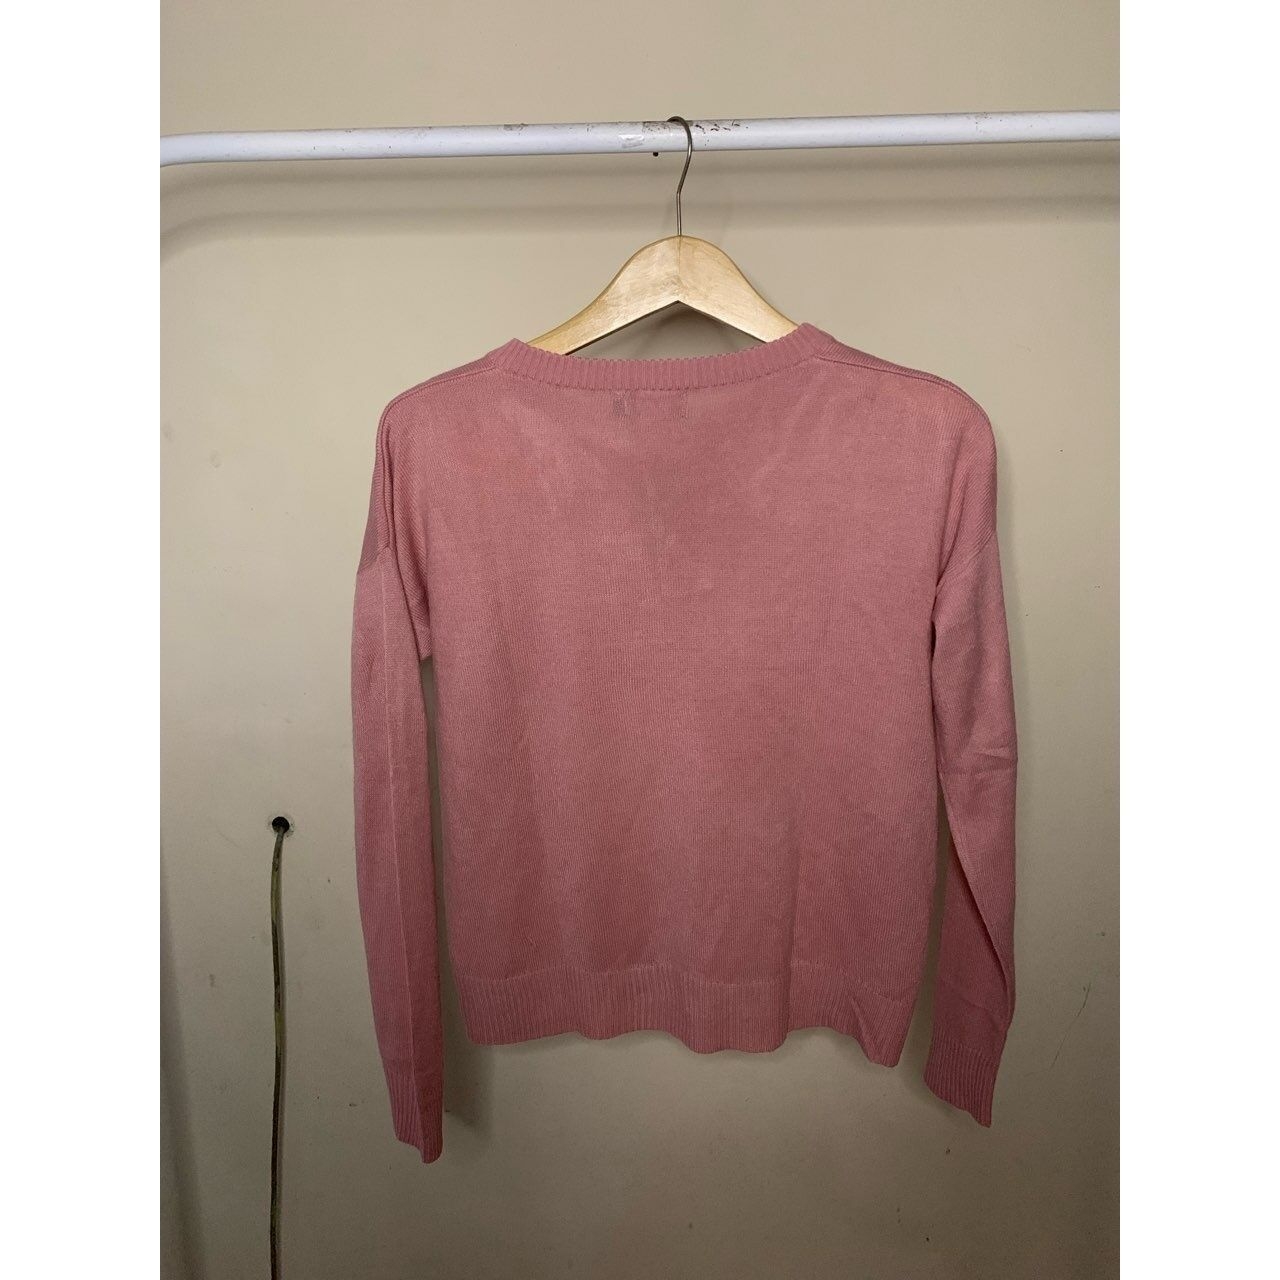 The Executive Pink Sweater